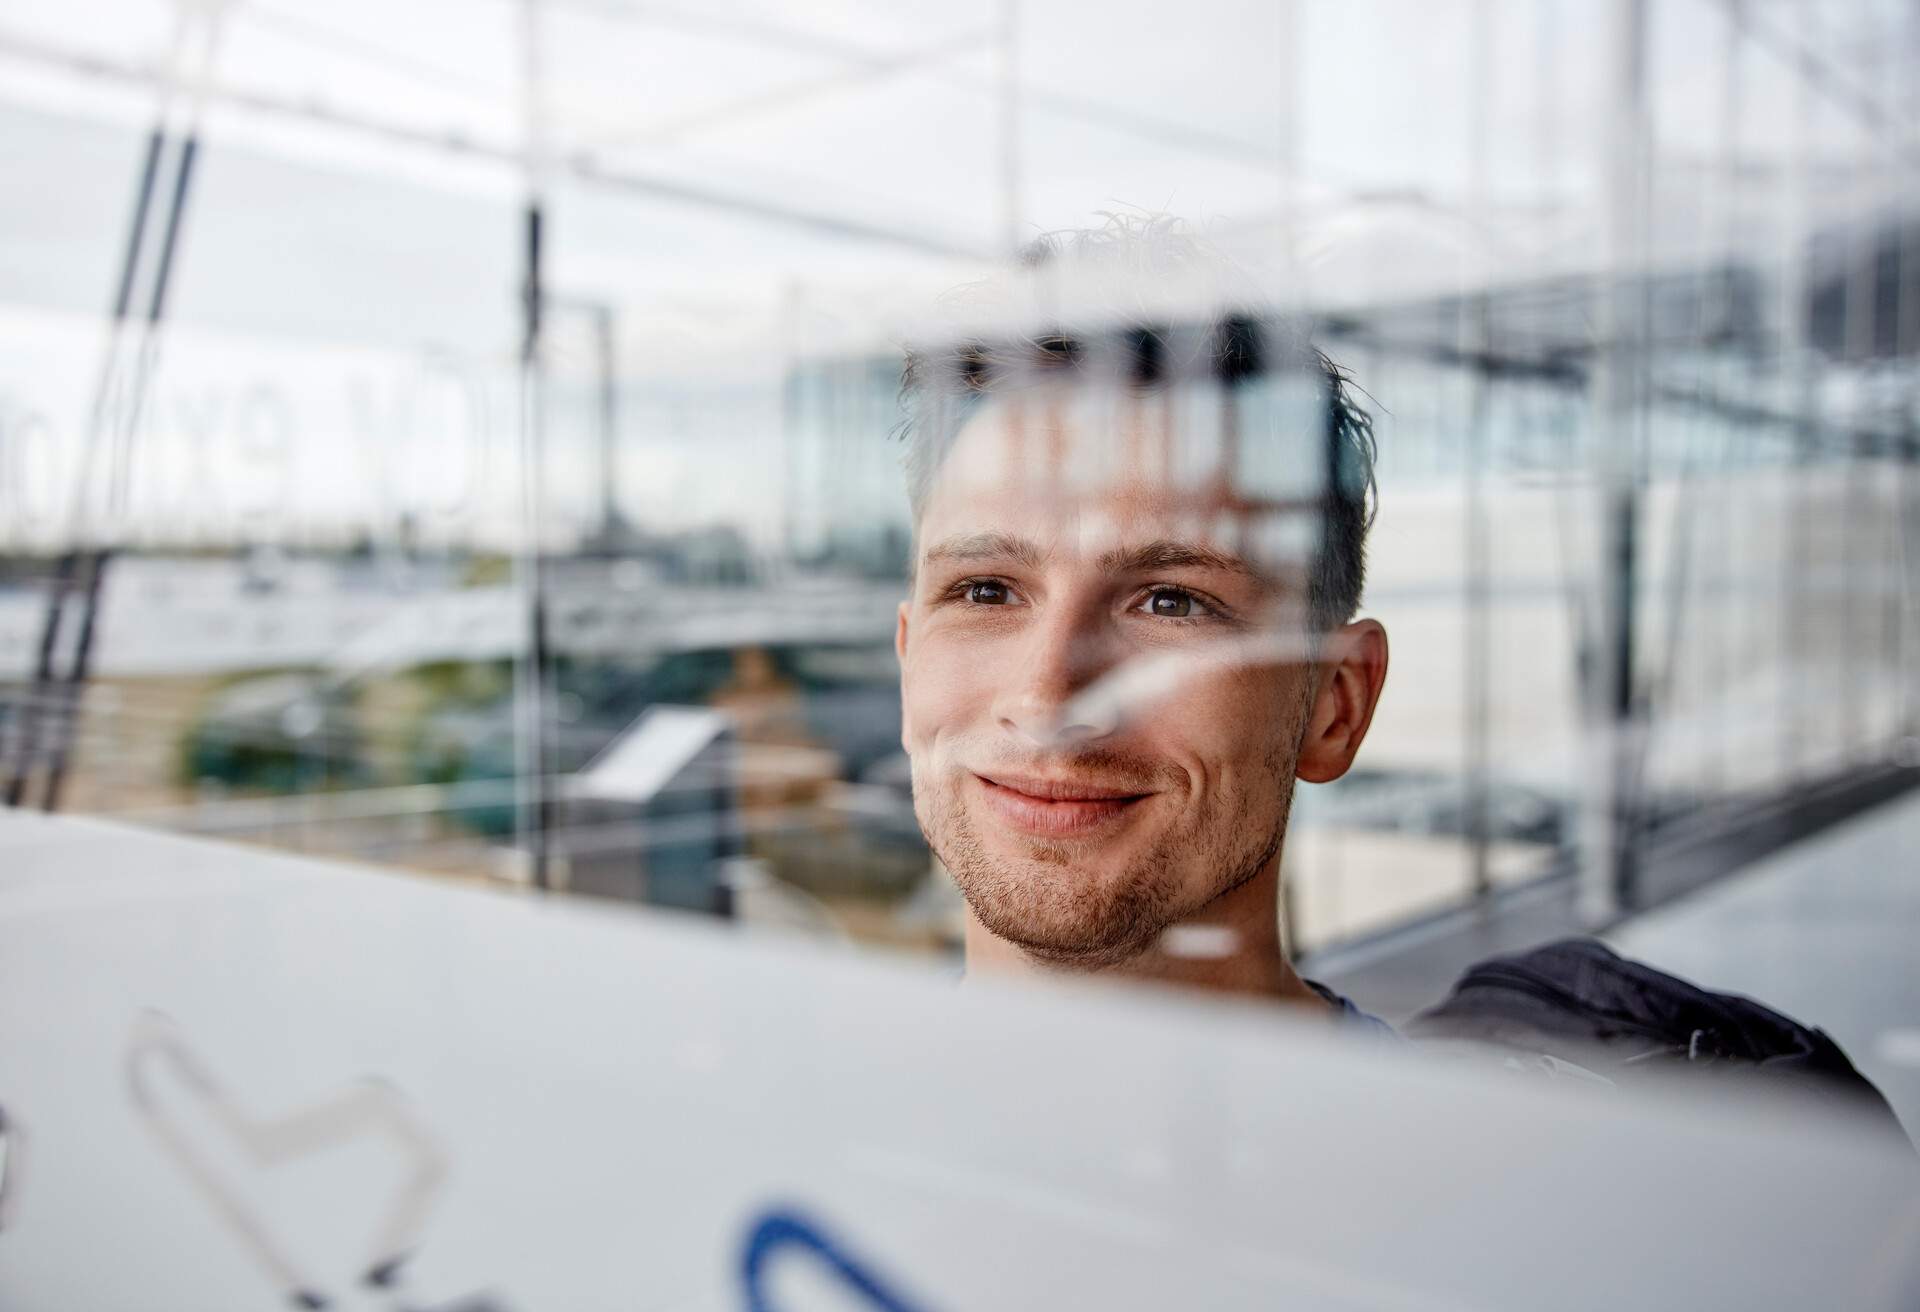 A person stands by a glass window, smiling as they gaze outward.